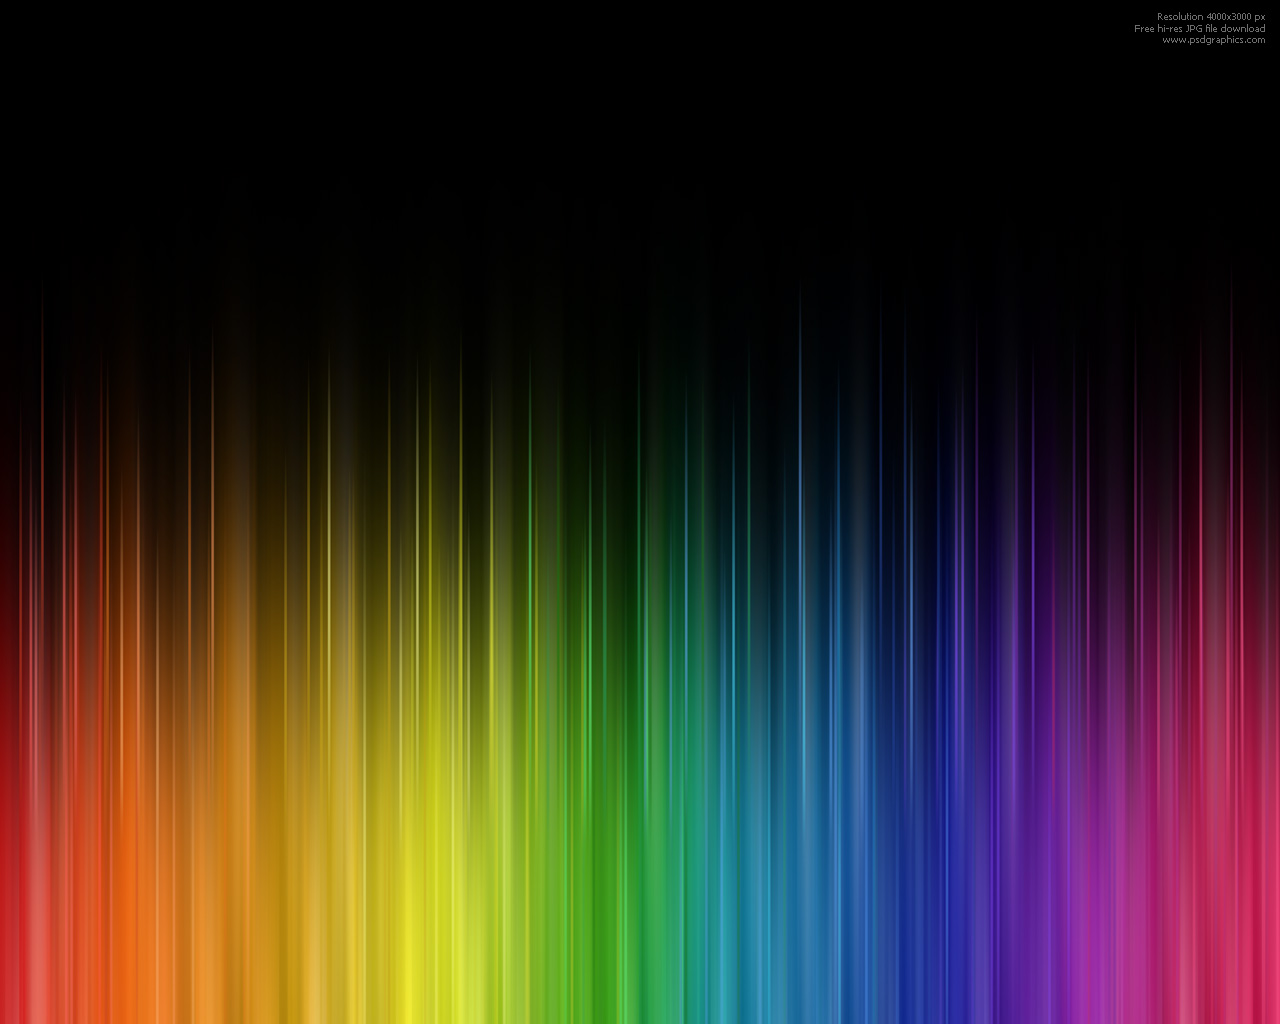 Awesome Colorful Backgrounds 2391 Hd Wallpapers in Others   Imagesci